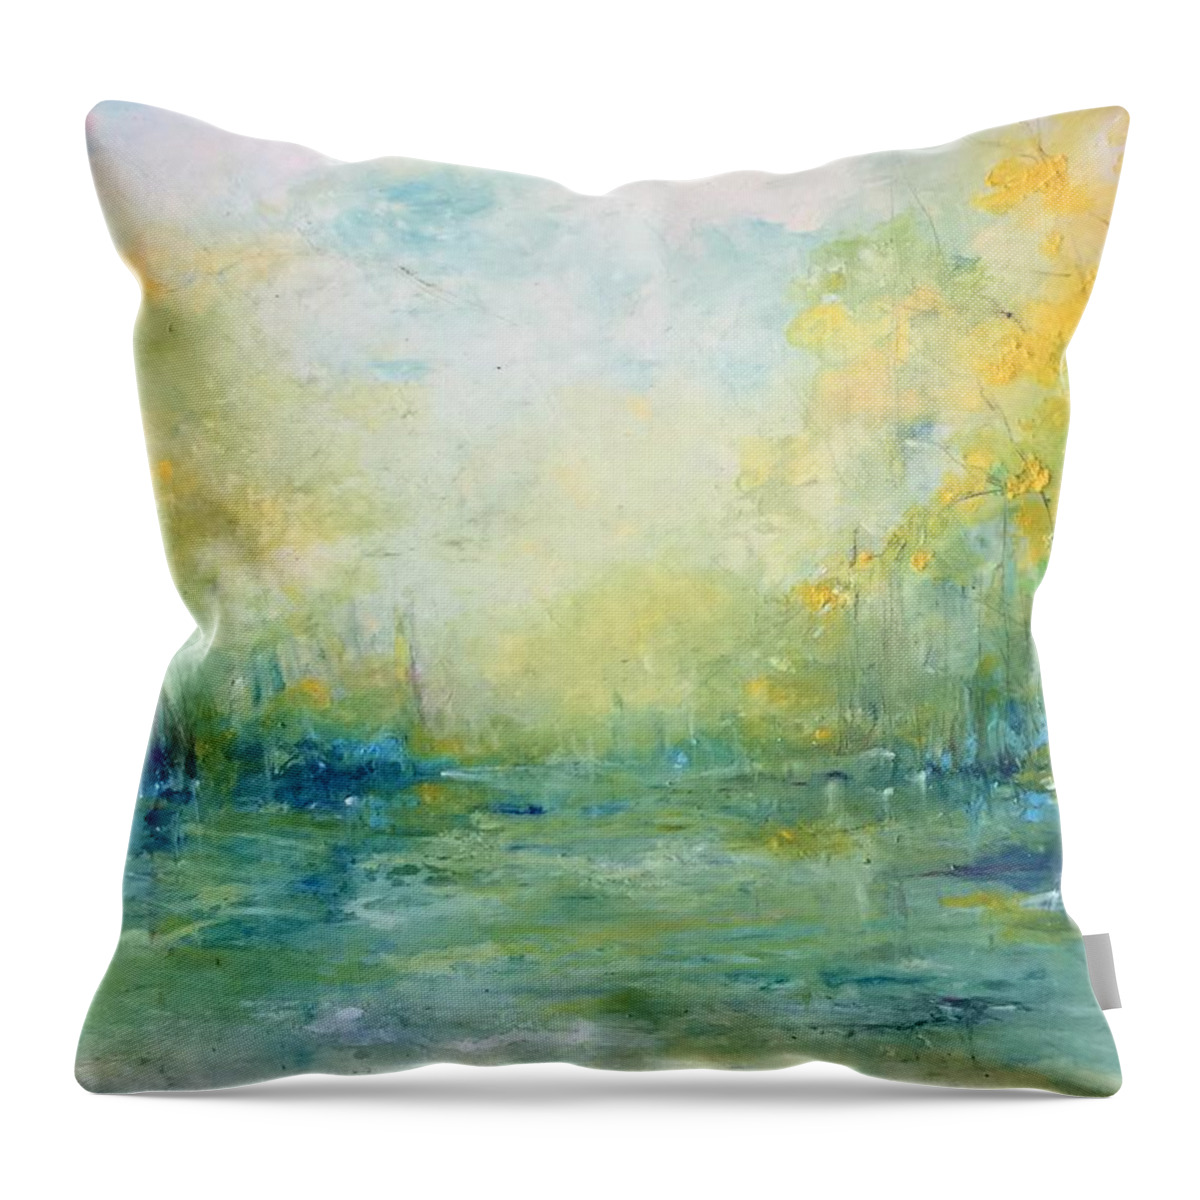  Throw Pillow featuring the painting A Sense Of Wonder by Robin Miller-Bookhout